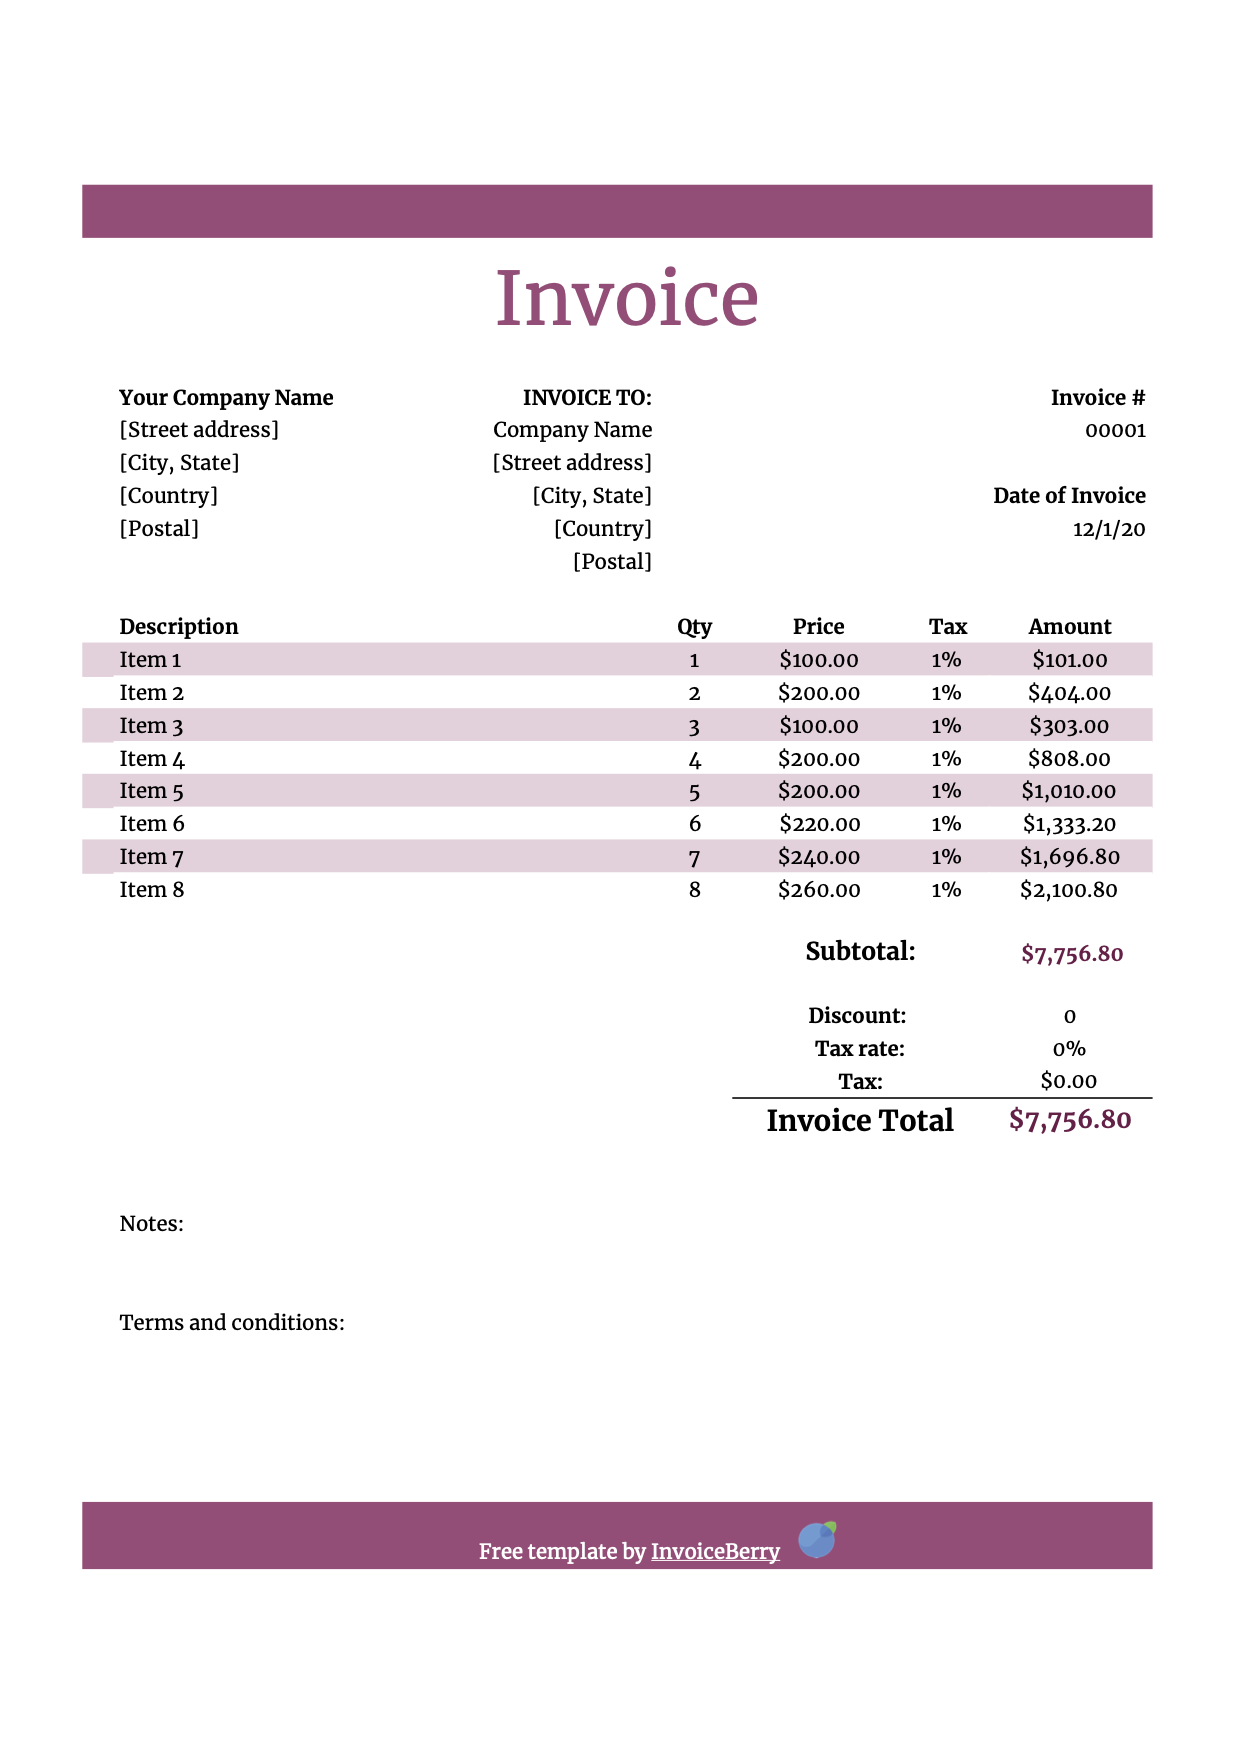 Free Numbers invoice templates - get invoice templates for Mac In Image Of Invoice Template